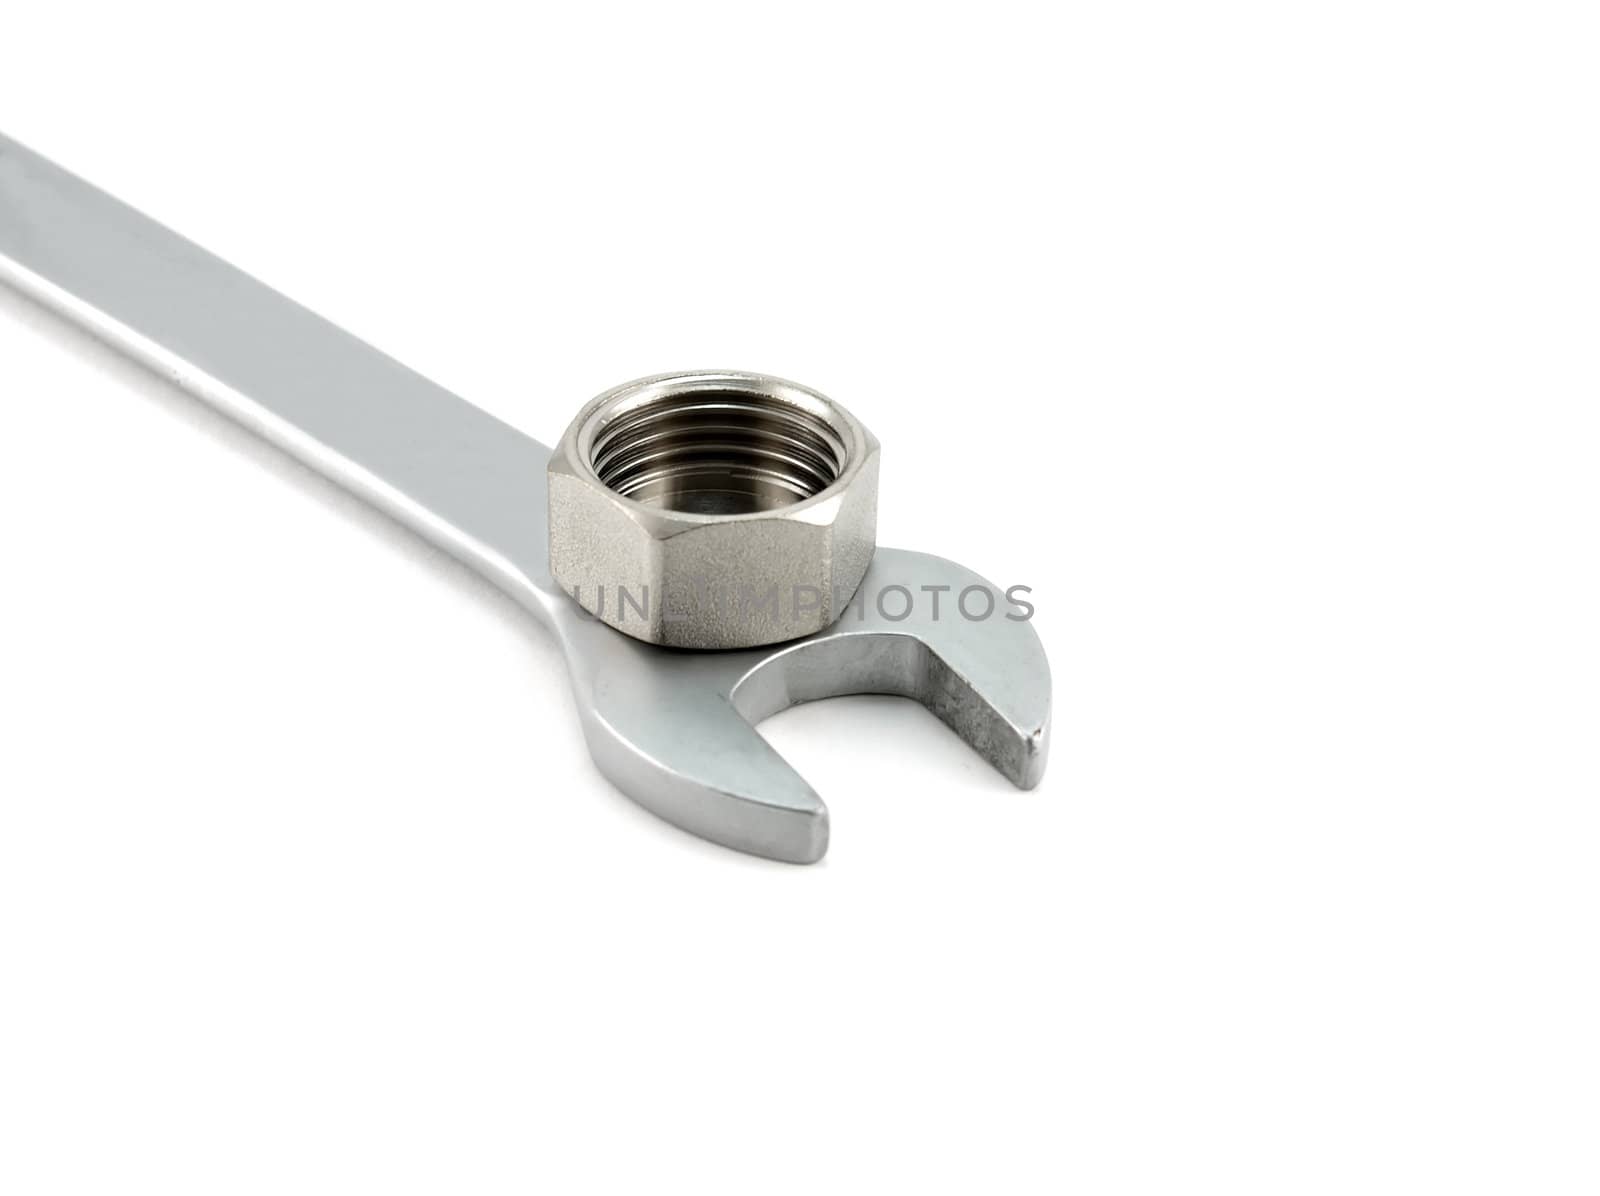 Spanner and female screw over white